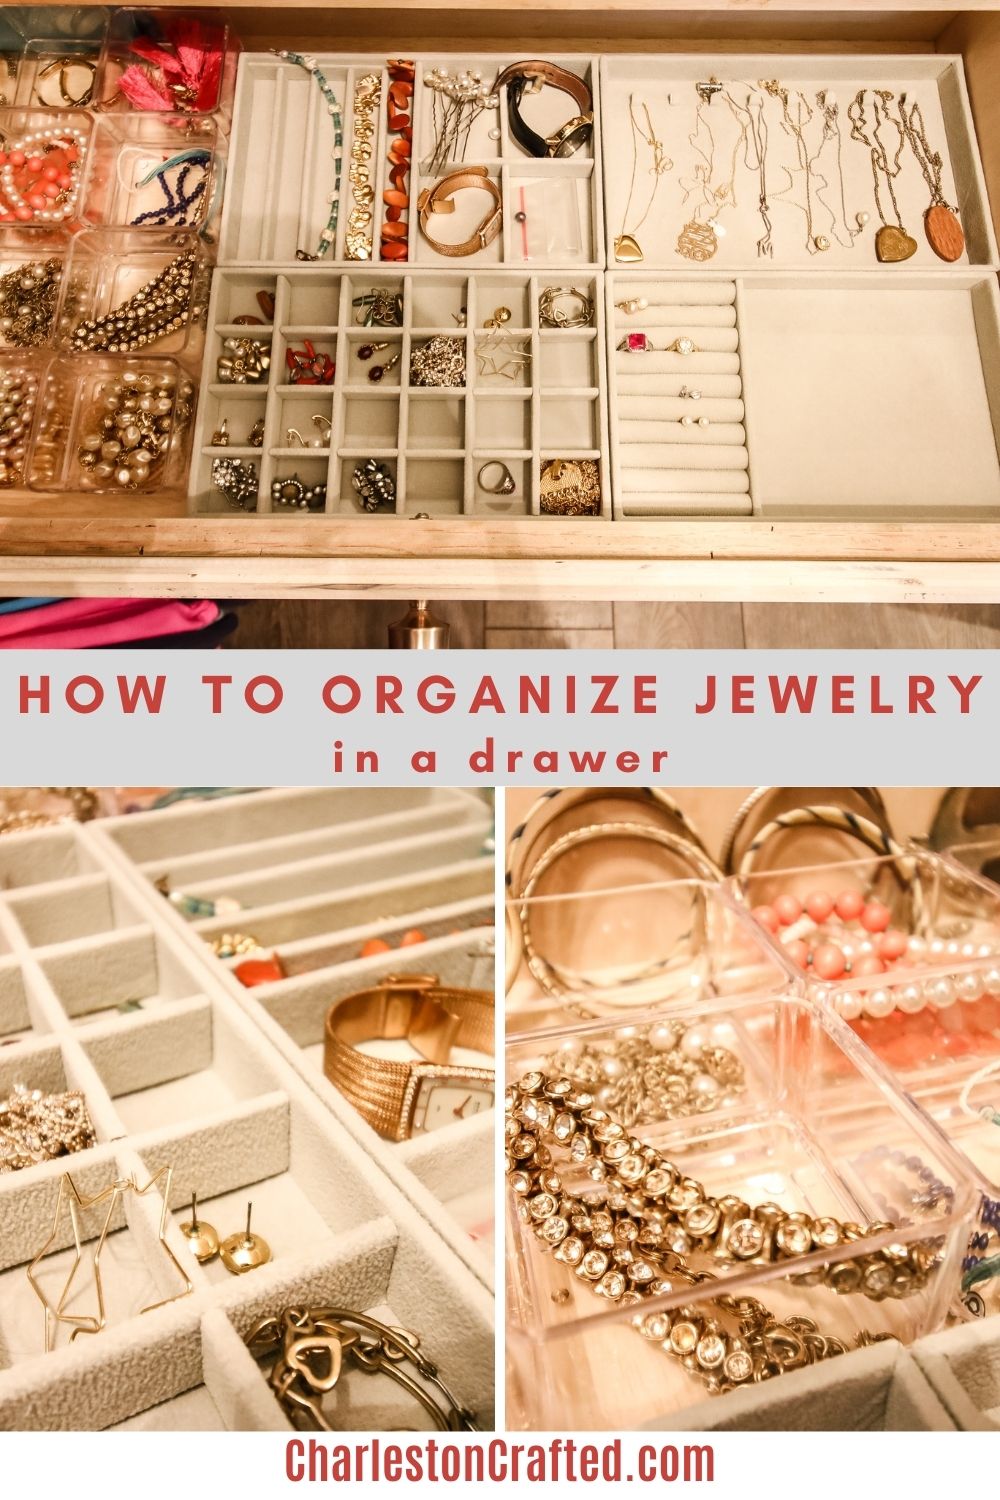 https://www.charlestoncrafted.com/wp-content/uploads/2022/03/how-to-organize-jewelry-in-a-drawer.jpg